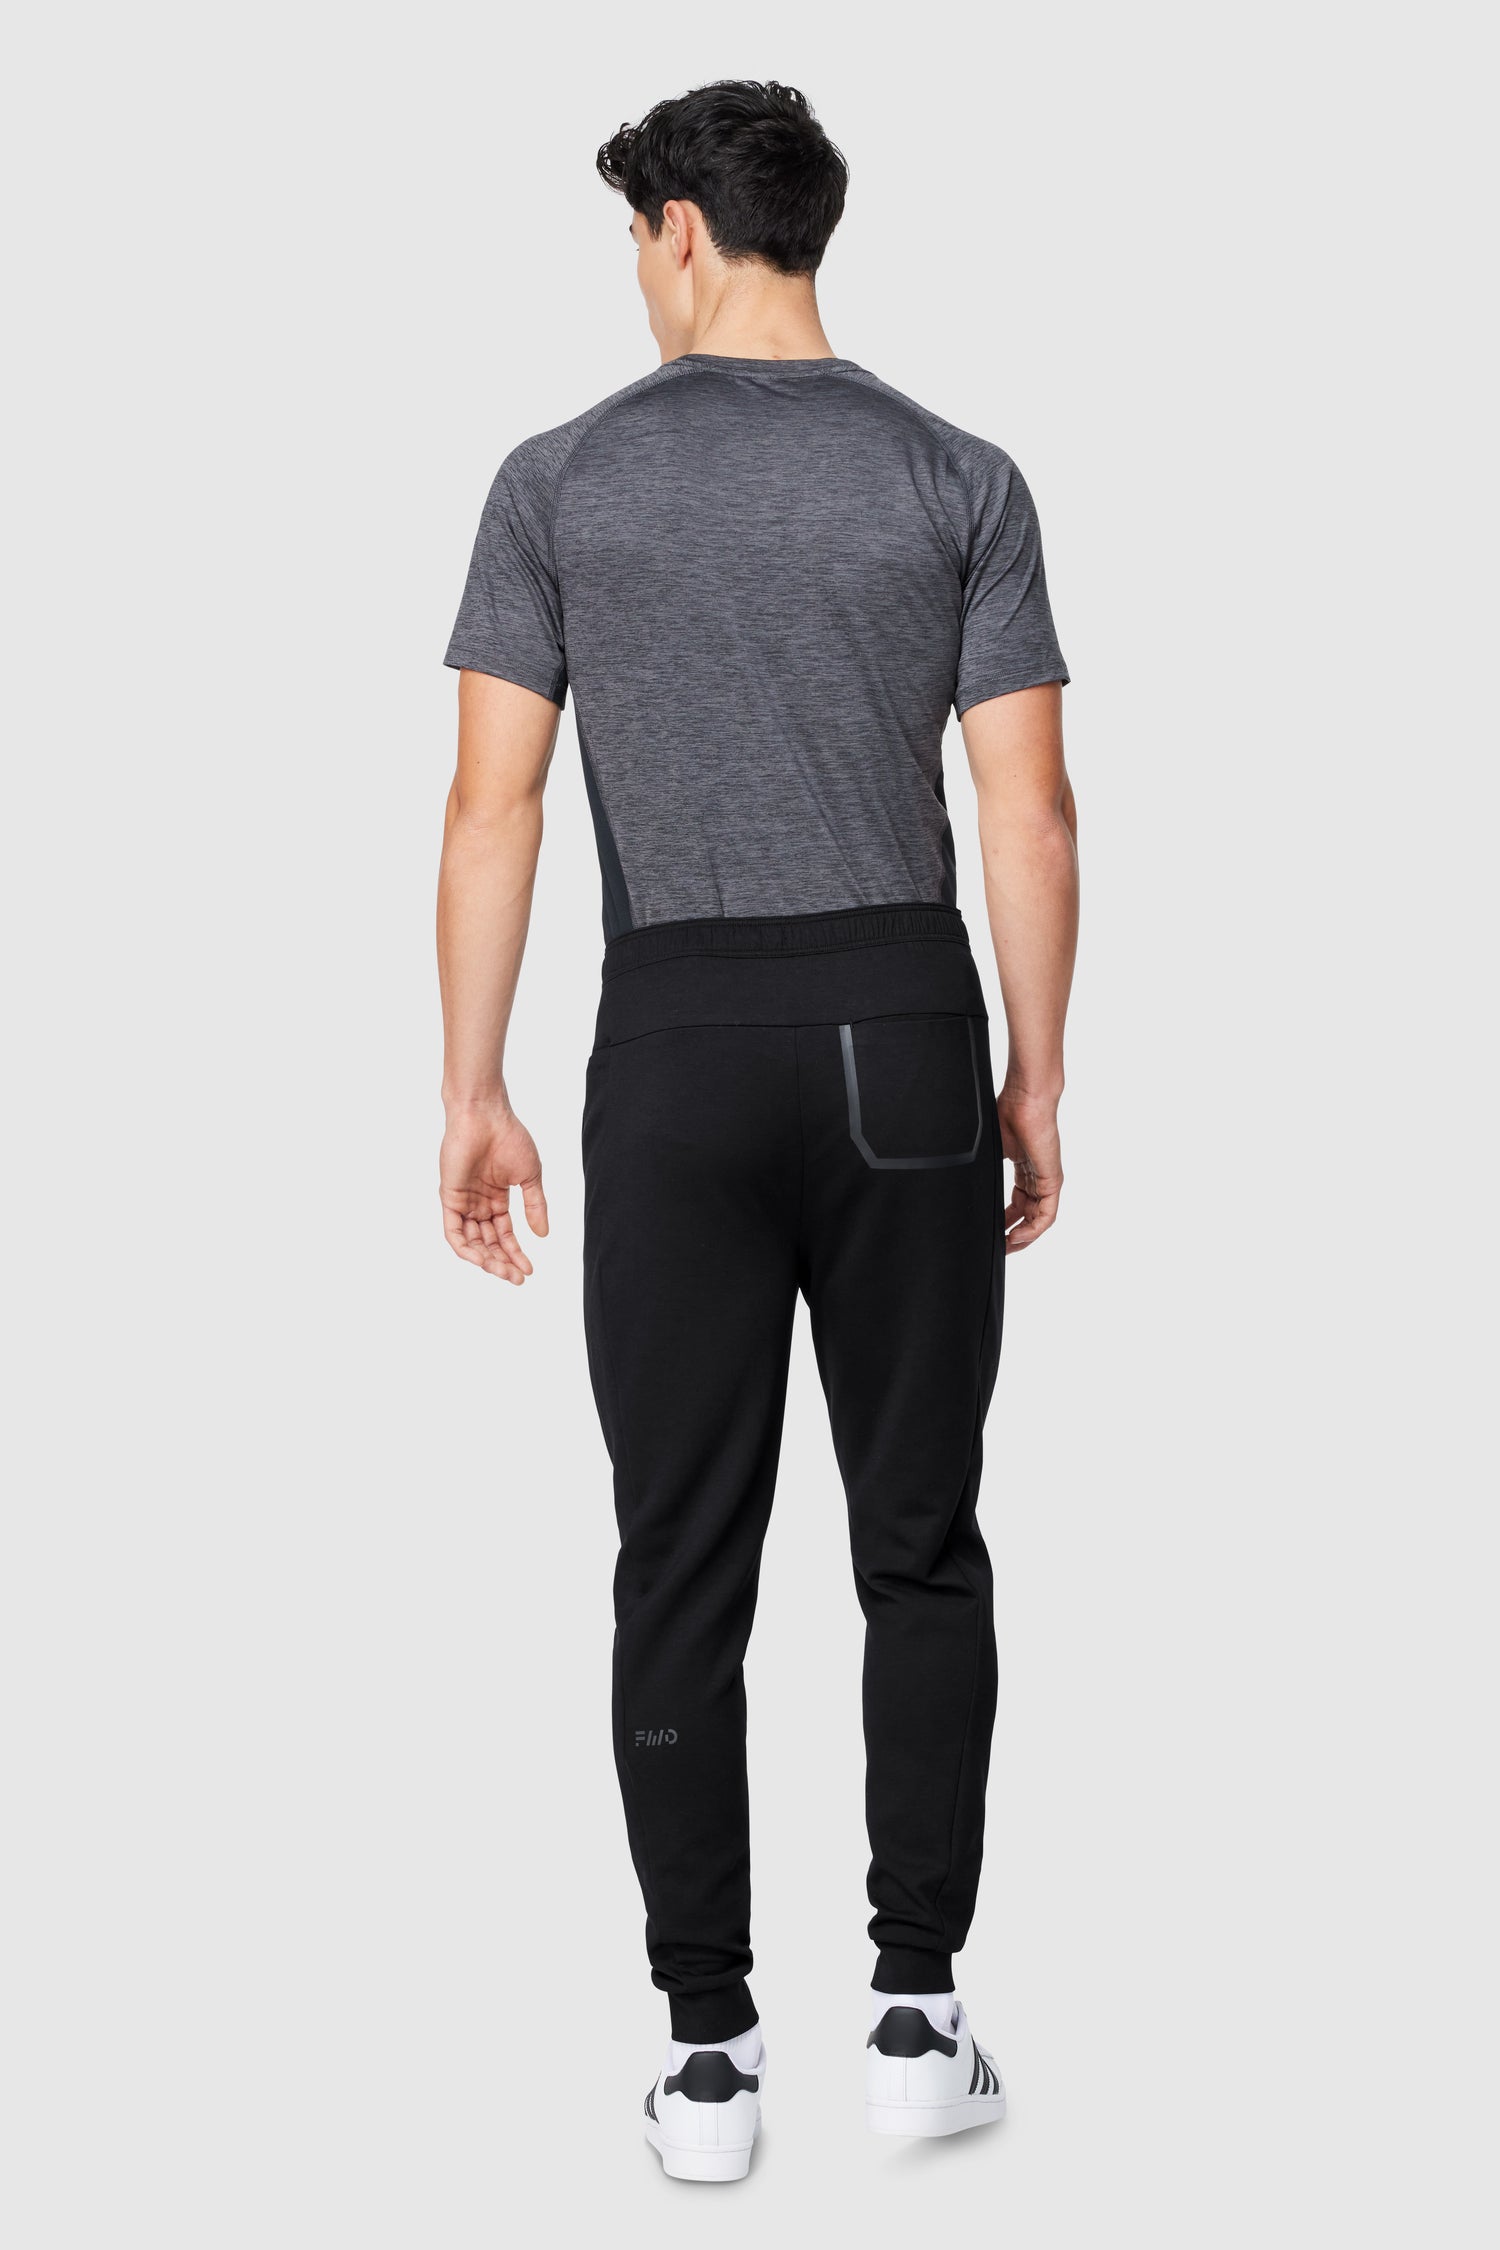 FWD Men's Core Spacer Knit Training Pant - BEST SELLING